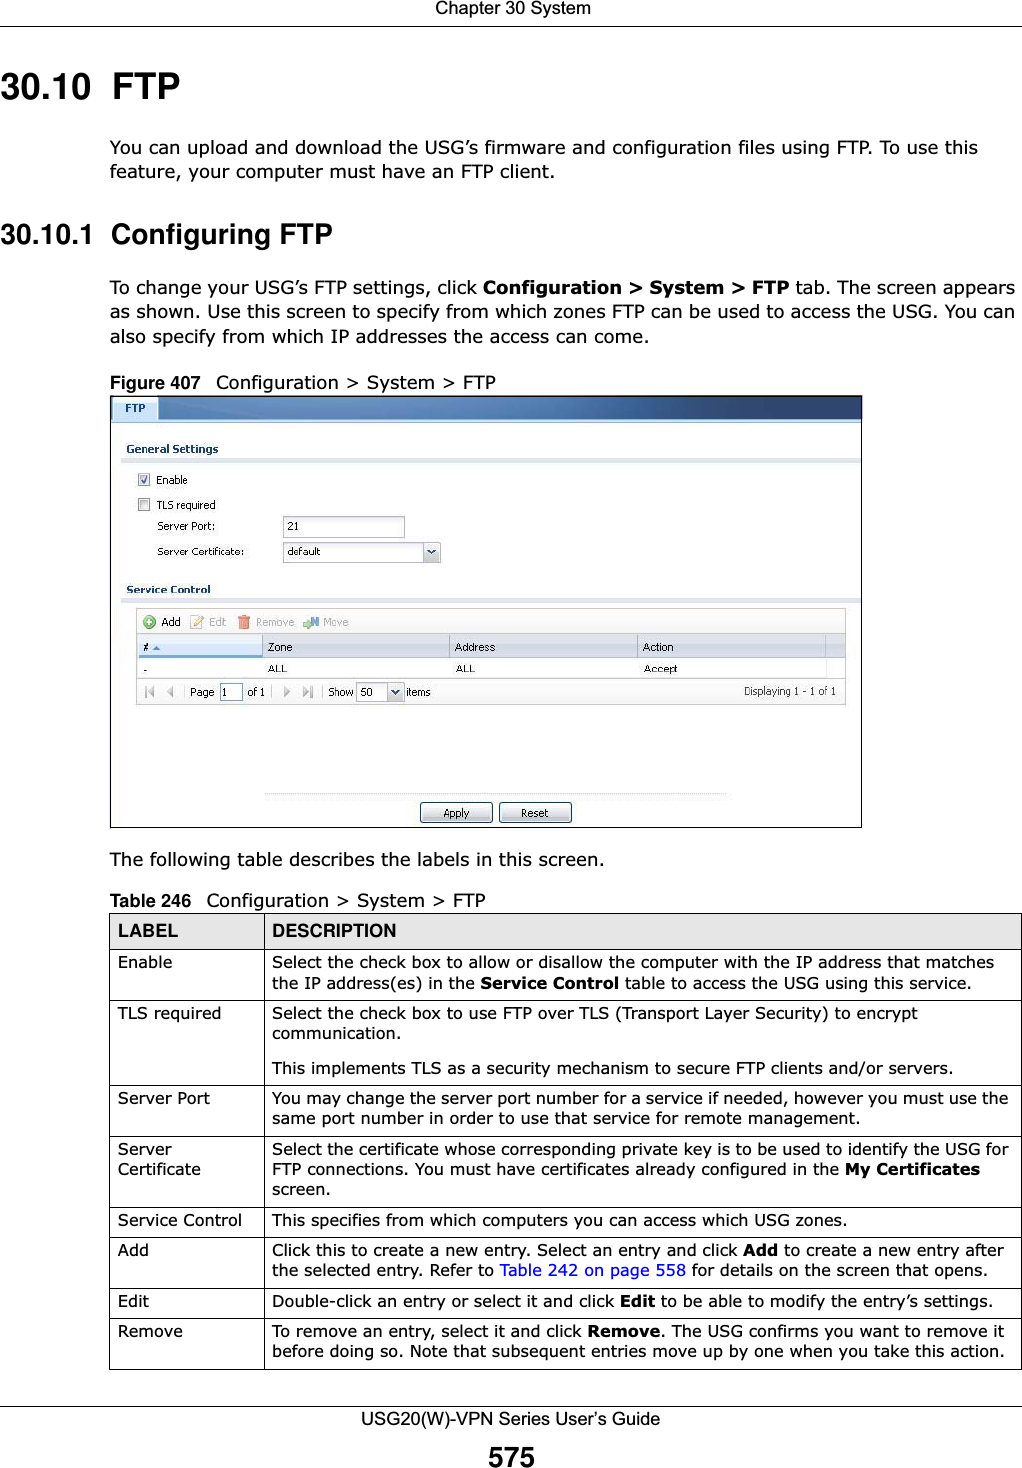  Chapter 30 SystemUSG20(W)-VPN Series User’s Guide57530.10  FTP You can upload and download the USG’s firmware and configuration files using FTP. To use this feature, your computer must have an FTP client.30.10.1  Configuring FTPTo change your USG’s FTP settings, click Configuration &gt; System &gt; FTP tab. The screen appears as shown. Use this screen to specify from which zones FTP can be used to access the USG. You can also specify from which IP addresses the access can come.Figure 407   Configuration &gt; System &gt; FTPThe following table describes the labels in this screen.  Table 246   Configuration &gt; System &gt; FTPLABEL DESCRIPTIONEnable Select the check box to allow or disallow the computer with the IP address that matches the IP address(es) in the Service Control table to access the USG using this service.TLS required Select the check box to use FTP over TLS (Transport Layer Security) to encrypt communication.This implements TLS as a security mechanism to secure FTP clients and/or servers.Server Port You may change the server port number for a service if needed, however you must use the same port number in order to use that service for remote management.Server CertificateSelect the certificate whose corresponding private key is to be used to identify the USG for FTP connections. You must have certificates already configured in the My Certificates screen.Service Control This specifies from which computers you can access which USG zones.Add Click this to create a new entry. Select an entry and click Add to create a new entry after the selected entry. Refer to Table 242 on page 558 for details on the screen that opens.Edit Double-click an entry or select it and click Edit to be able to modify the entry’s settings. Remove To remove an entry, select it and click Remove. The USG confirms you want to remove it before doing so. Note that subsequent entries move up by one when you take this action.